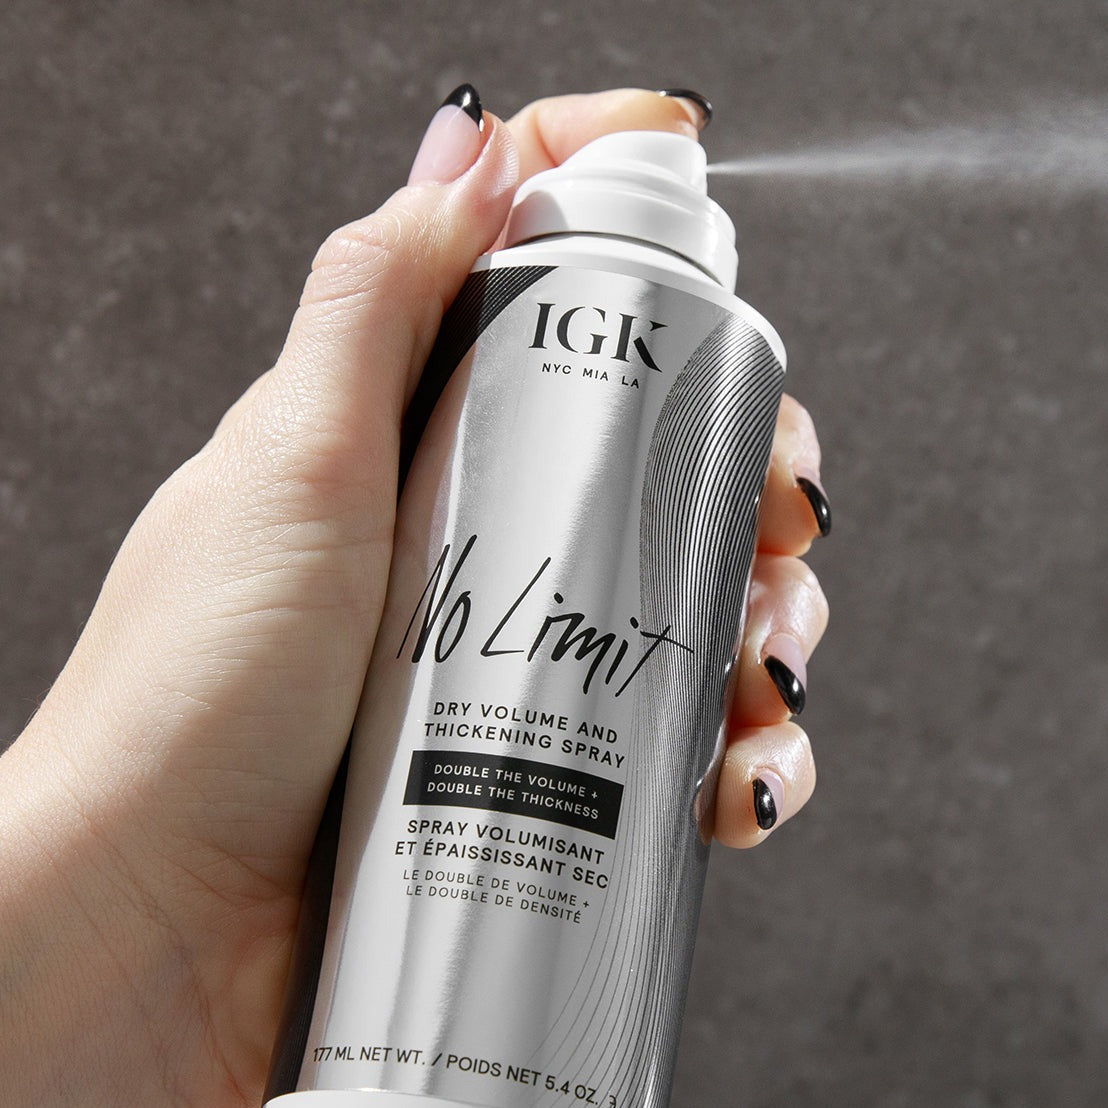 No Limit - Dry Volume and Thickening Spray